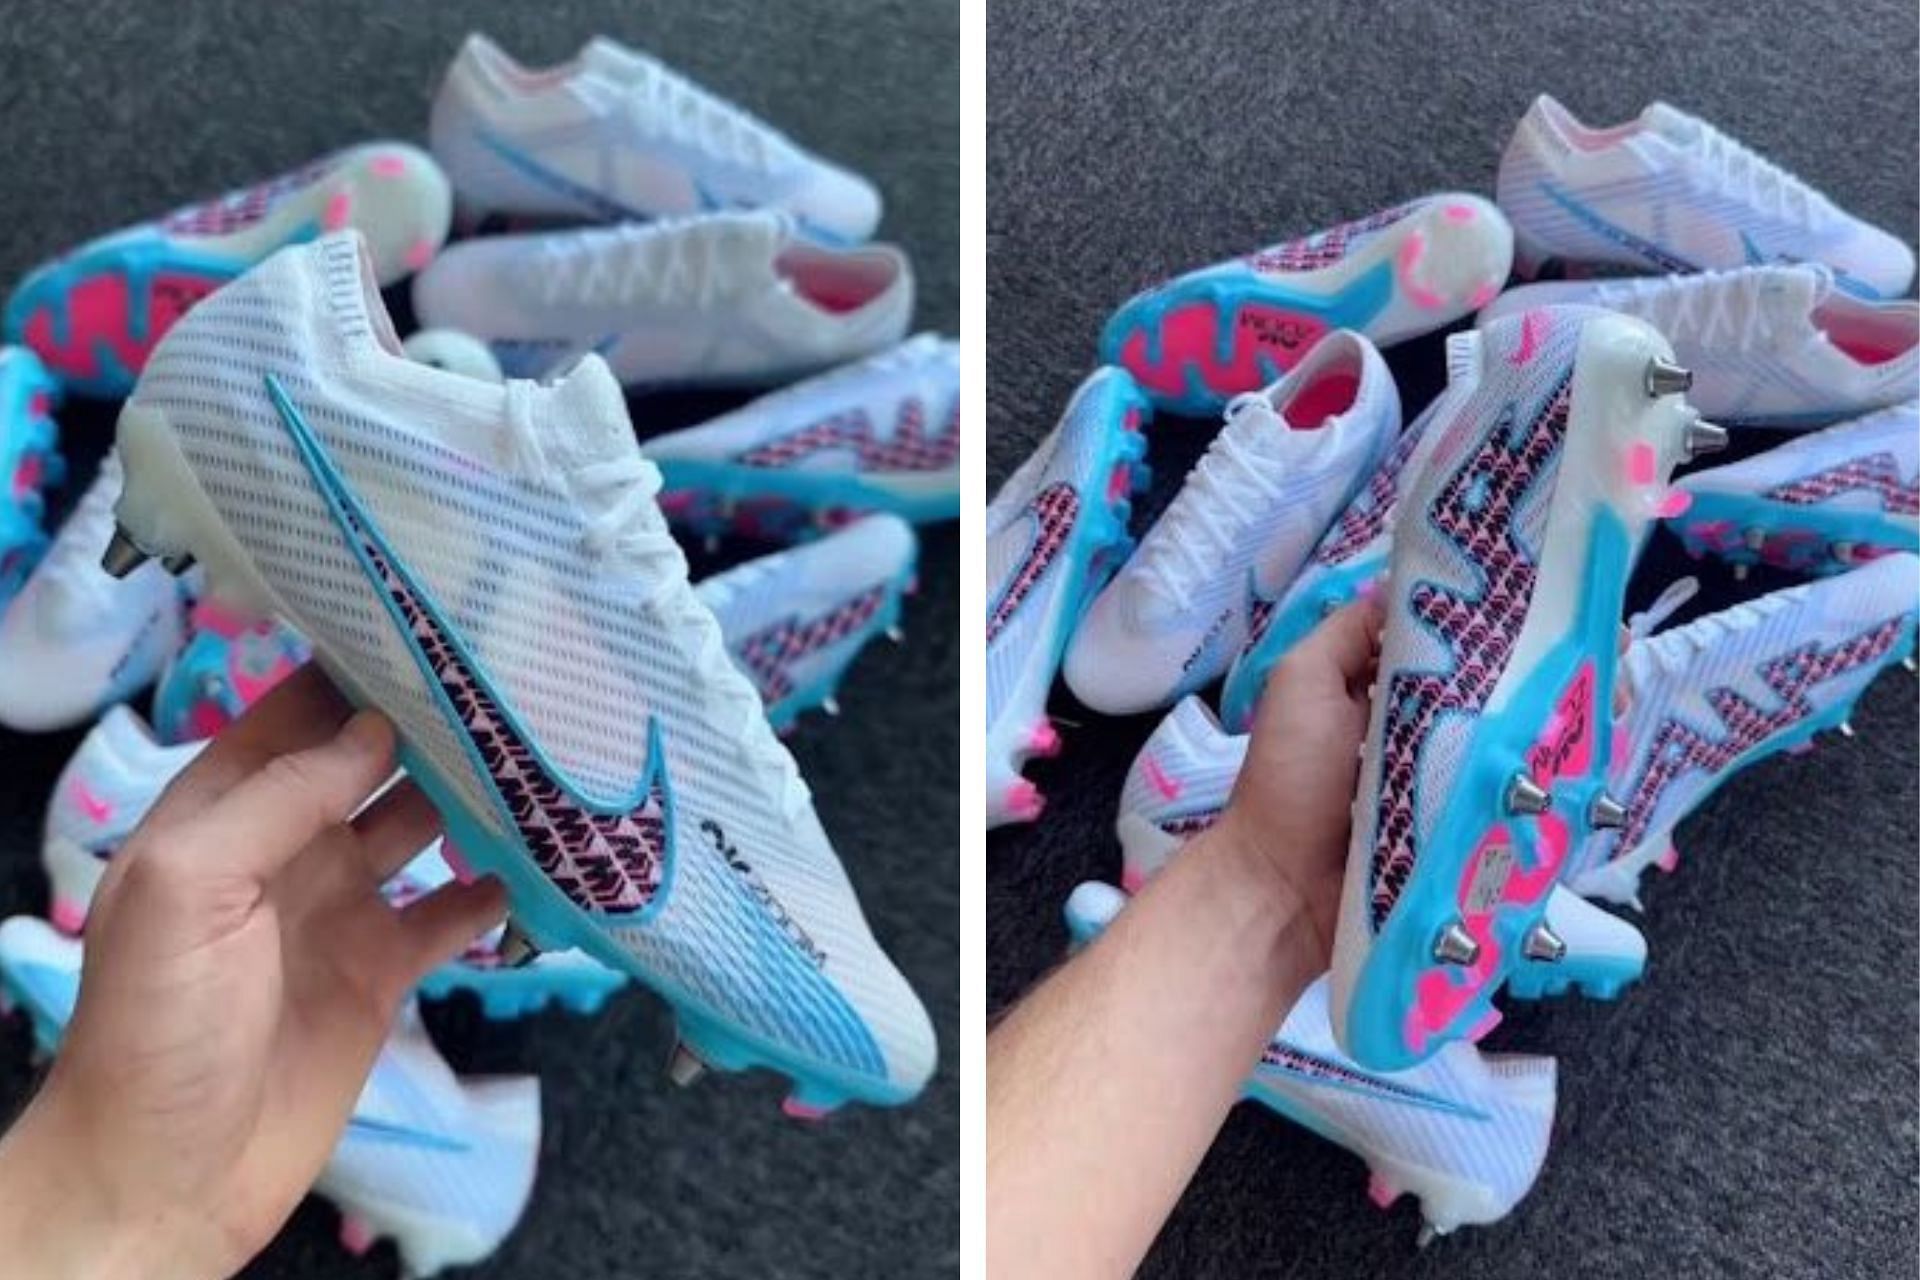 Take a closer look at the Nike Zoom Mercurial White/Baltic Blue/Laser Pink football boots (Image via Instagram/@bwbootsuk)